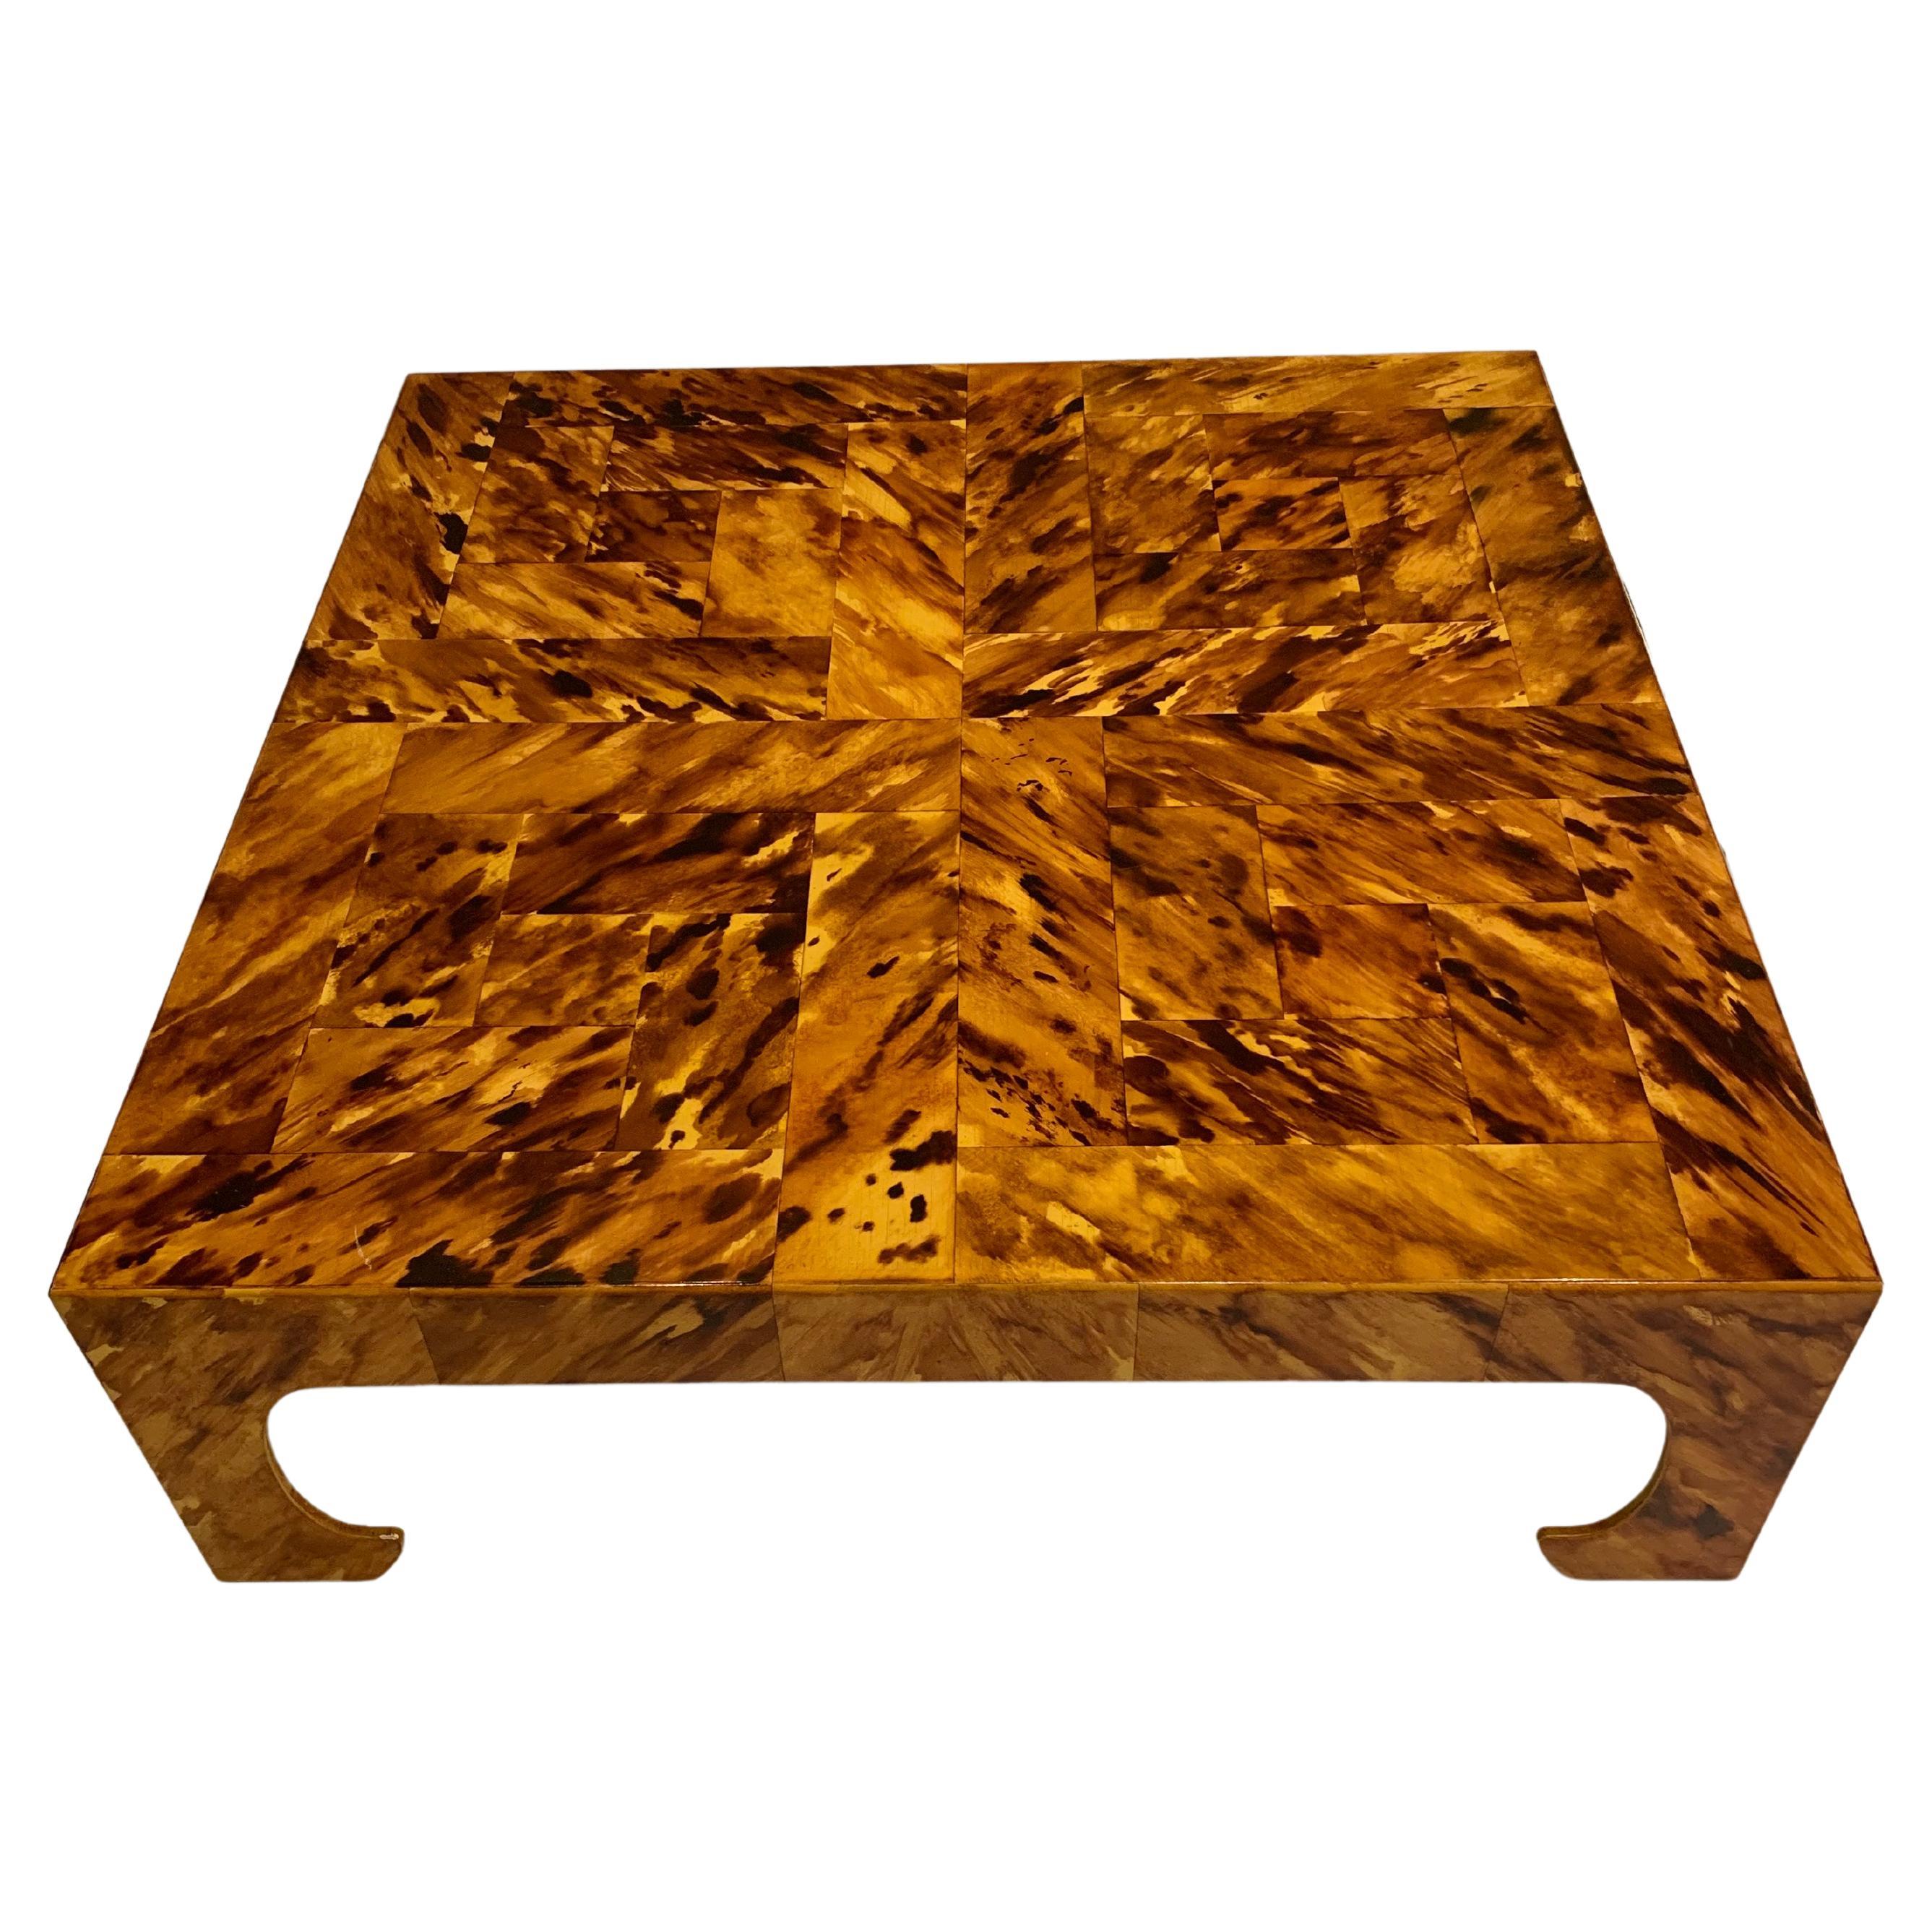 1970s Square Low Italian Painted Wood Faux Tortoiseshell Style Coffee Table